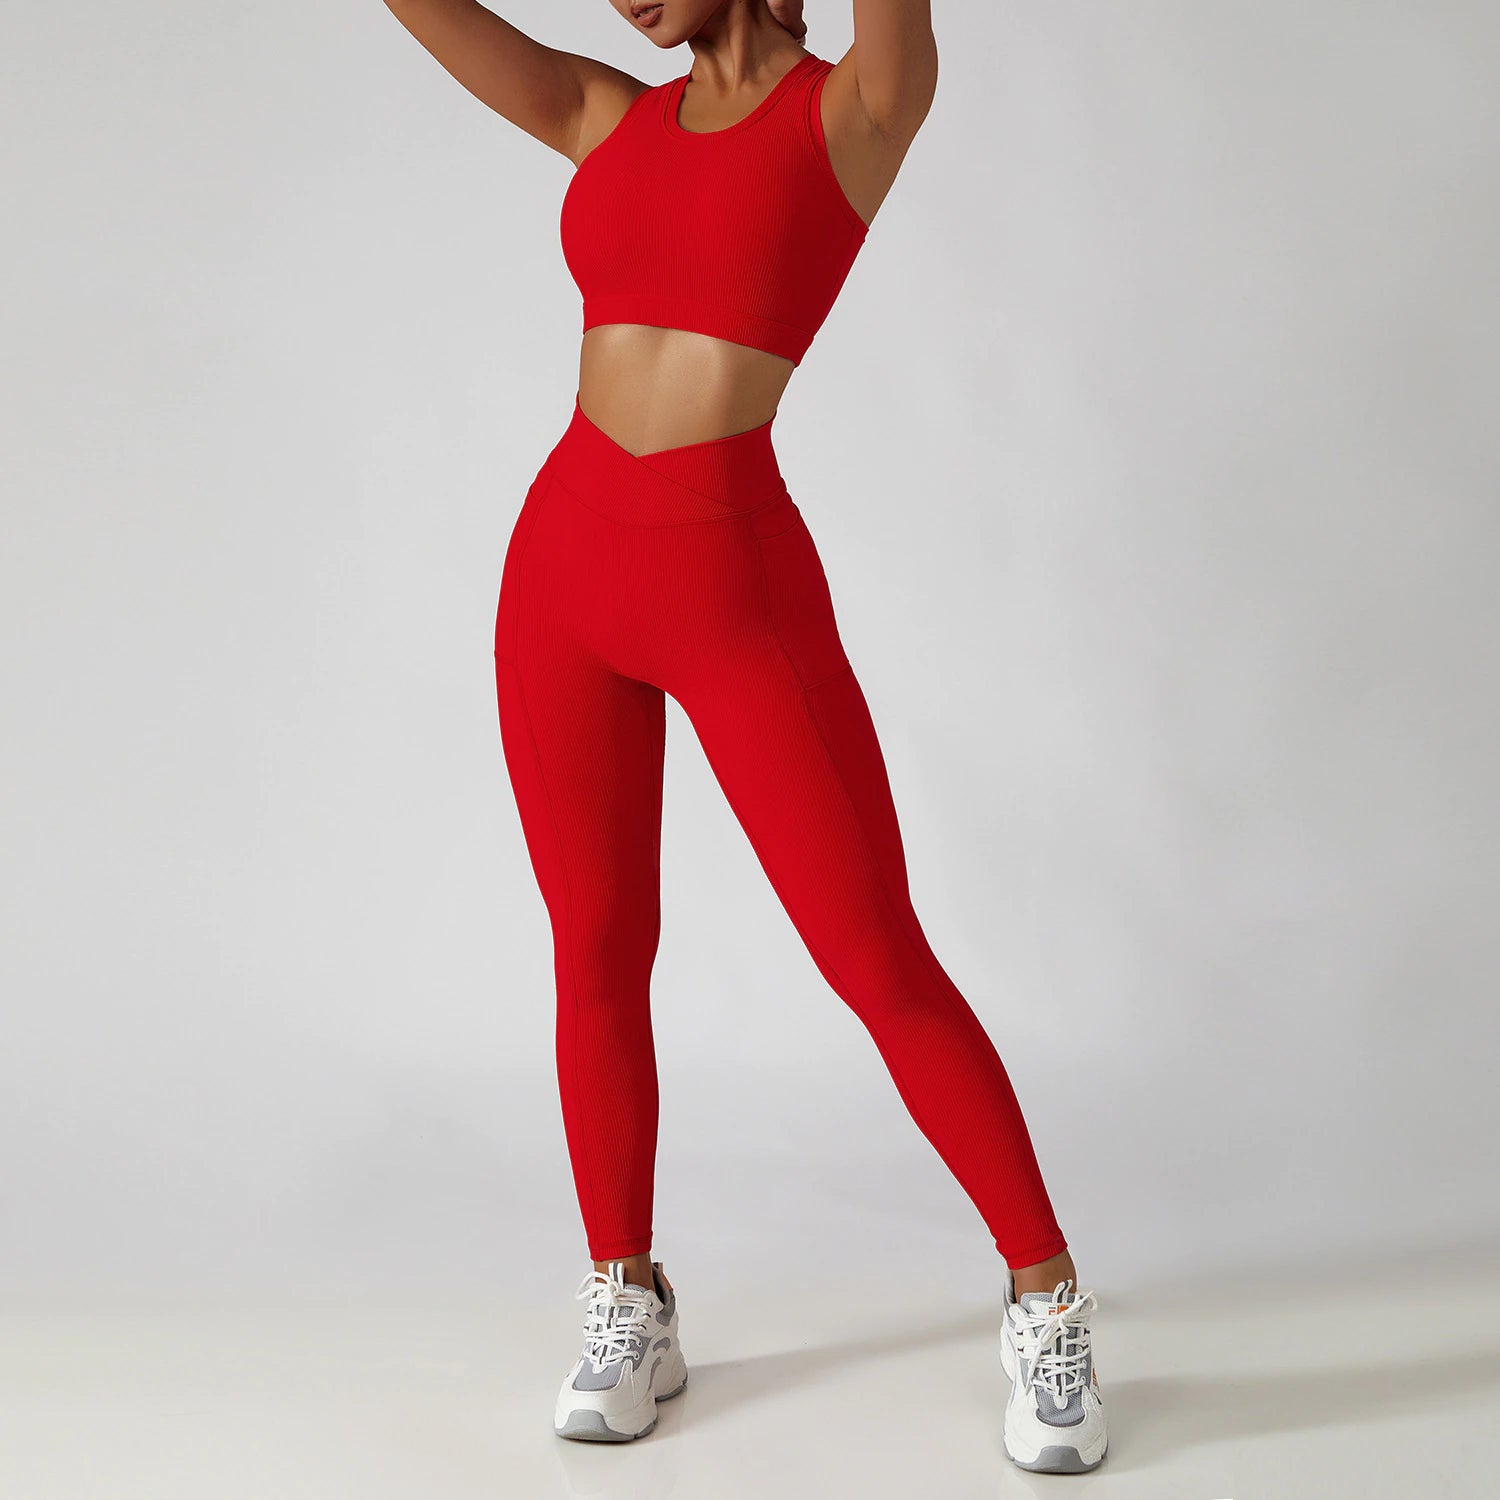 Yoga Outfits Quick Dry Set Red Sport Women Breathable Sportswear Tracksuit  Fitness Tank Top Leggings Ropa Deportiva Mujer From Lvmangguo, $16.87